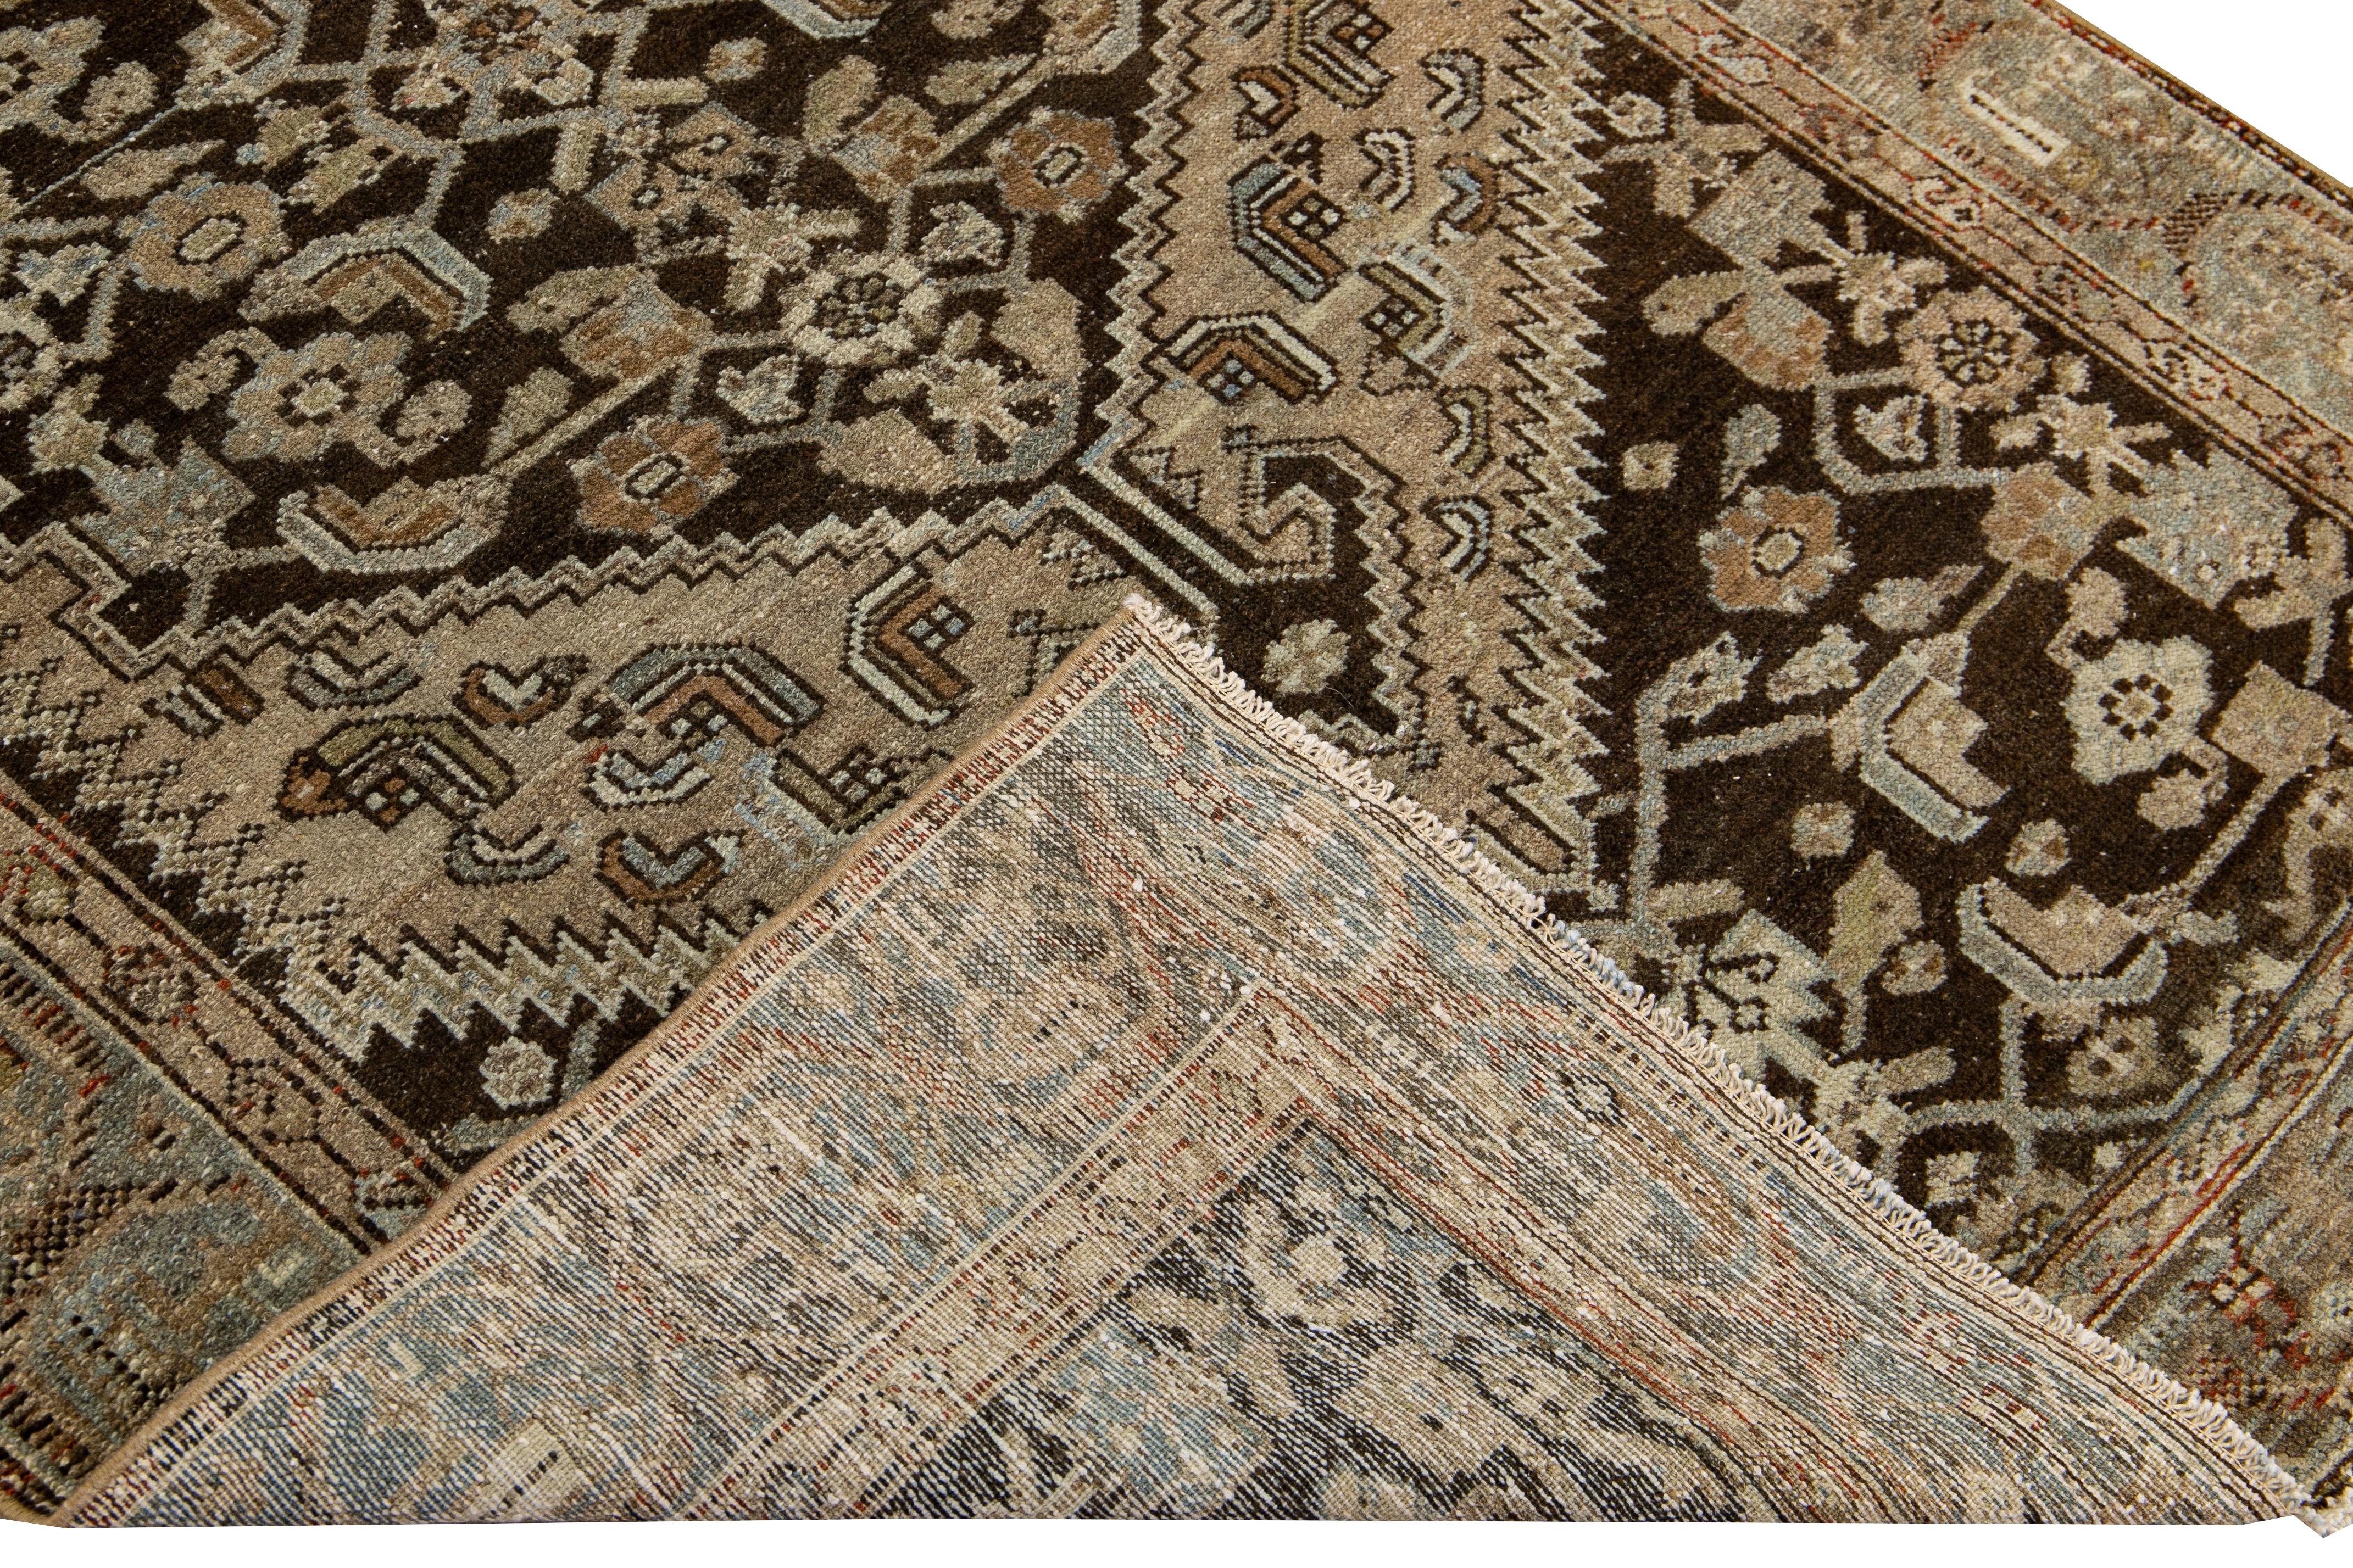 Beautiful antique Malayer hand-knotted wool rug with a brown field. This Malayer piece has a blue and beige accent in a gorgeous all-over geometric floral design.

This rug measures: 3'10